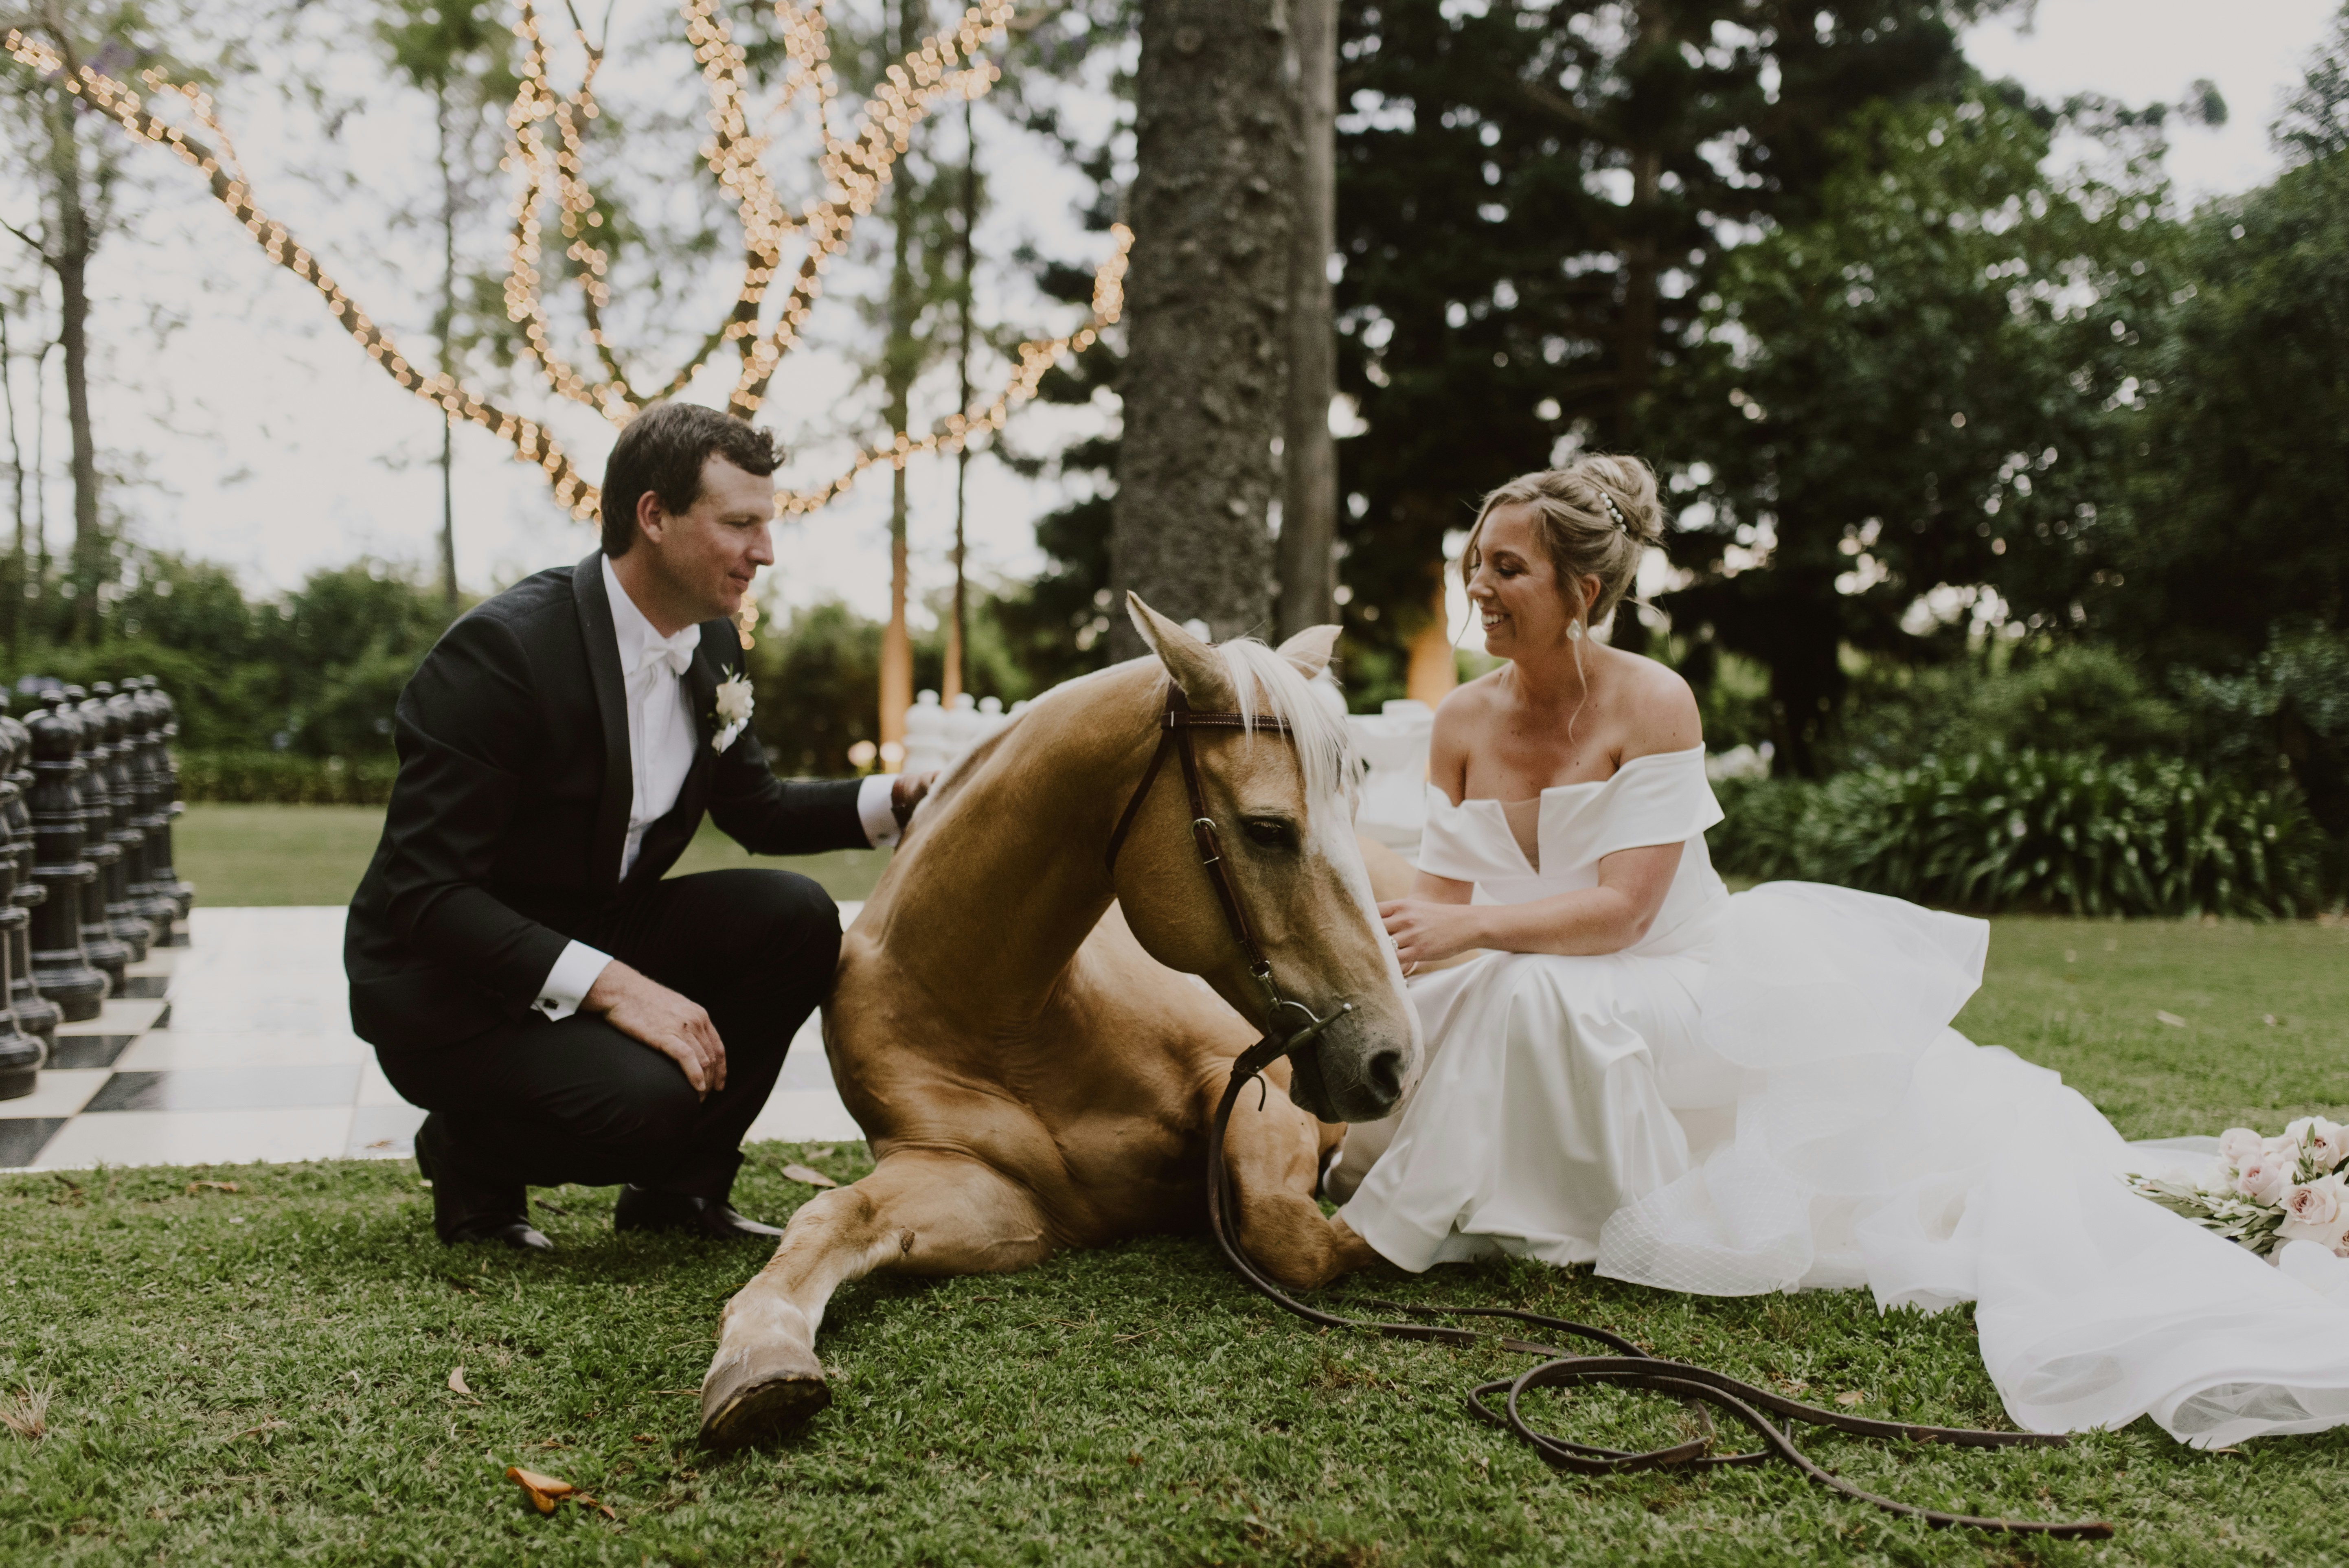 Bride and groom sitting down petting horse